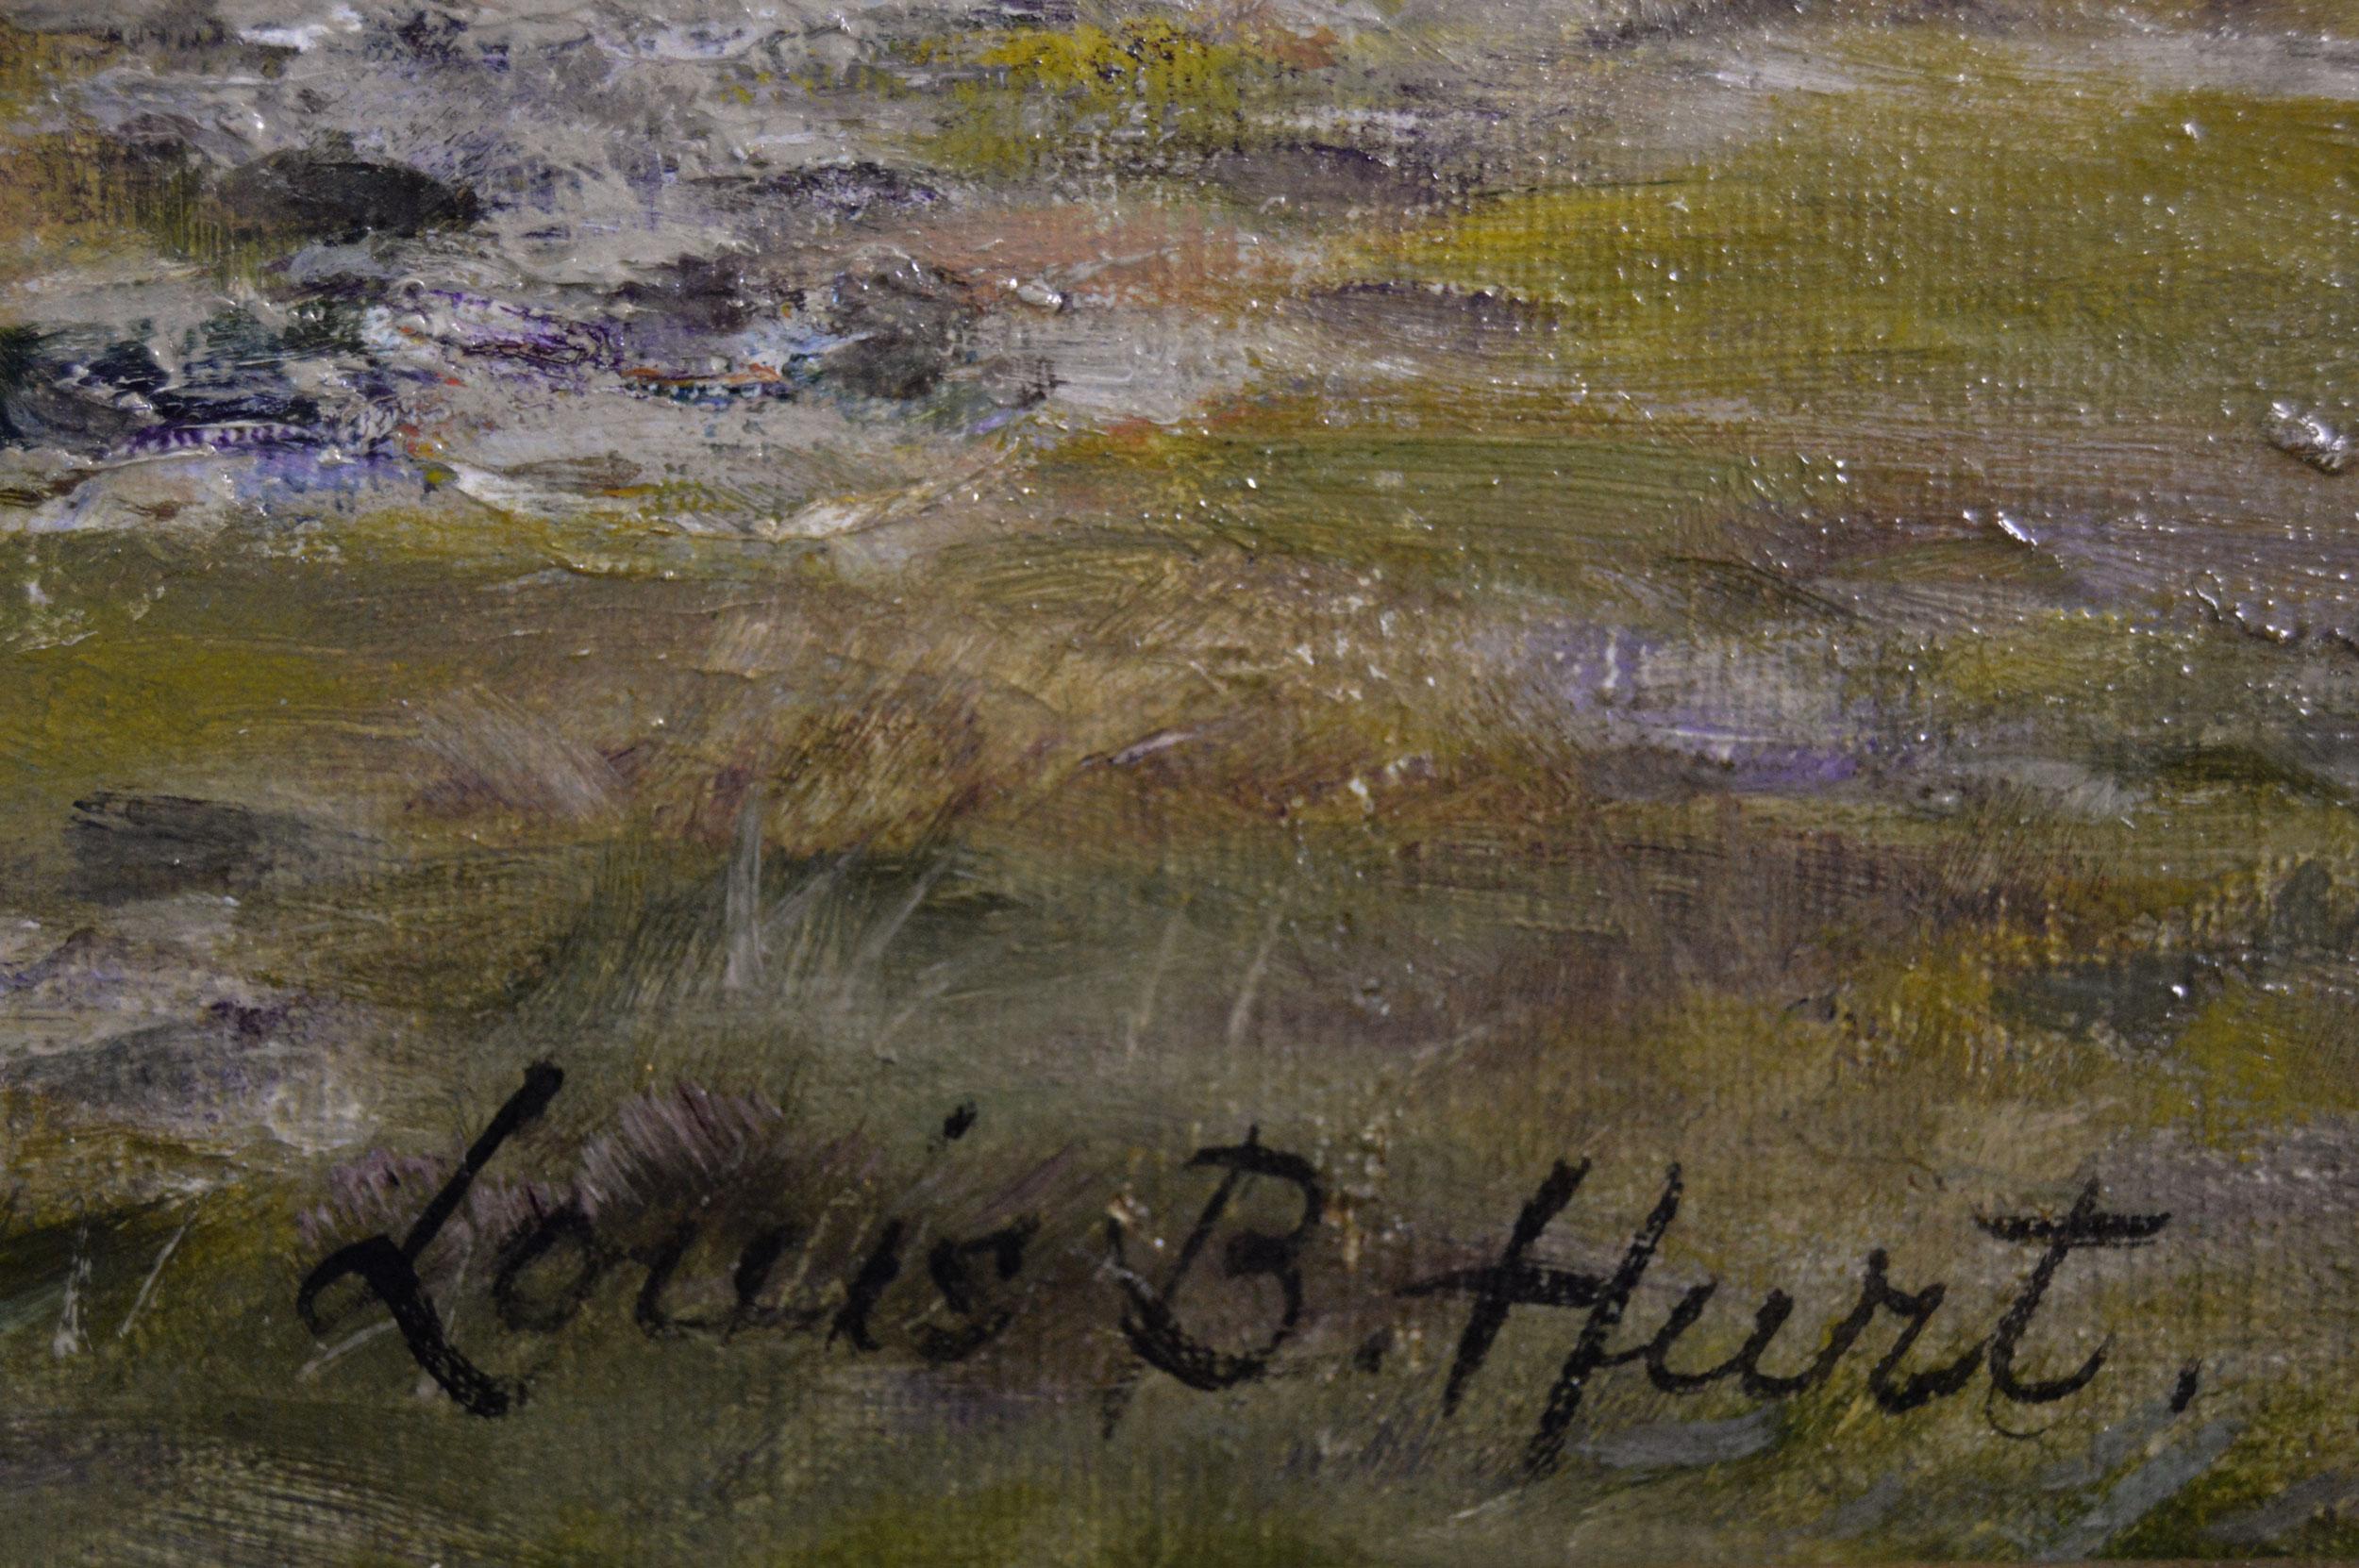 Louis Bosworth Hurt
British, (1856-1929)
Crossing the Moorland
Oil on canvas, signed & inscribed with title in pencil on the stretcher
Image size: 23.5 inches x 39.25 inches 
Size including frame: 31 inches x 46.75 inches

A highly atmospheric